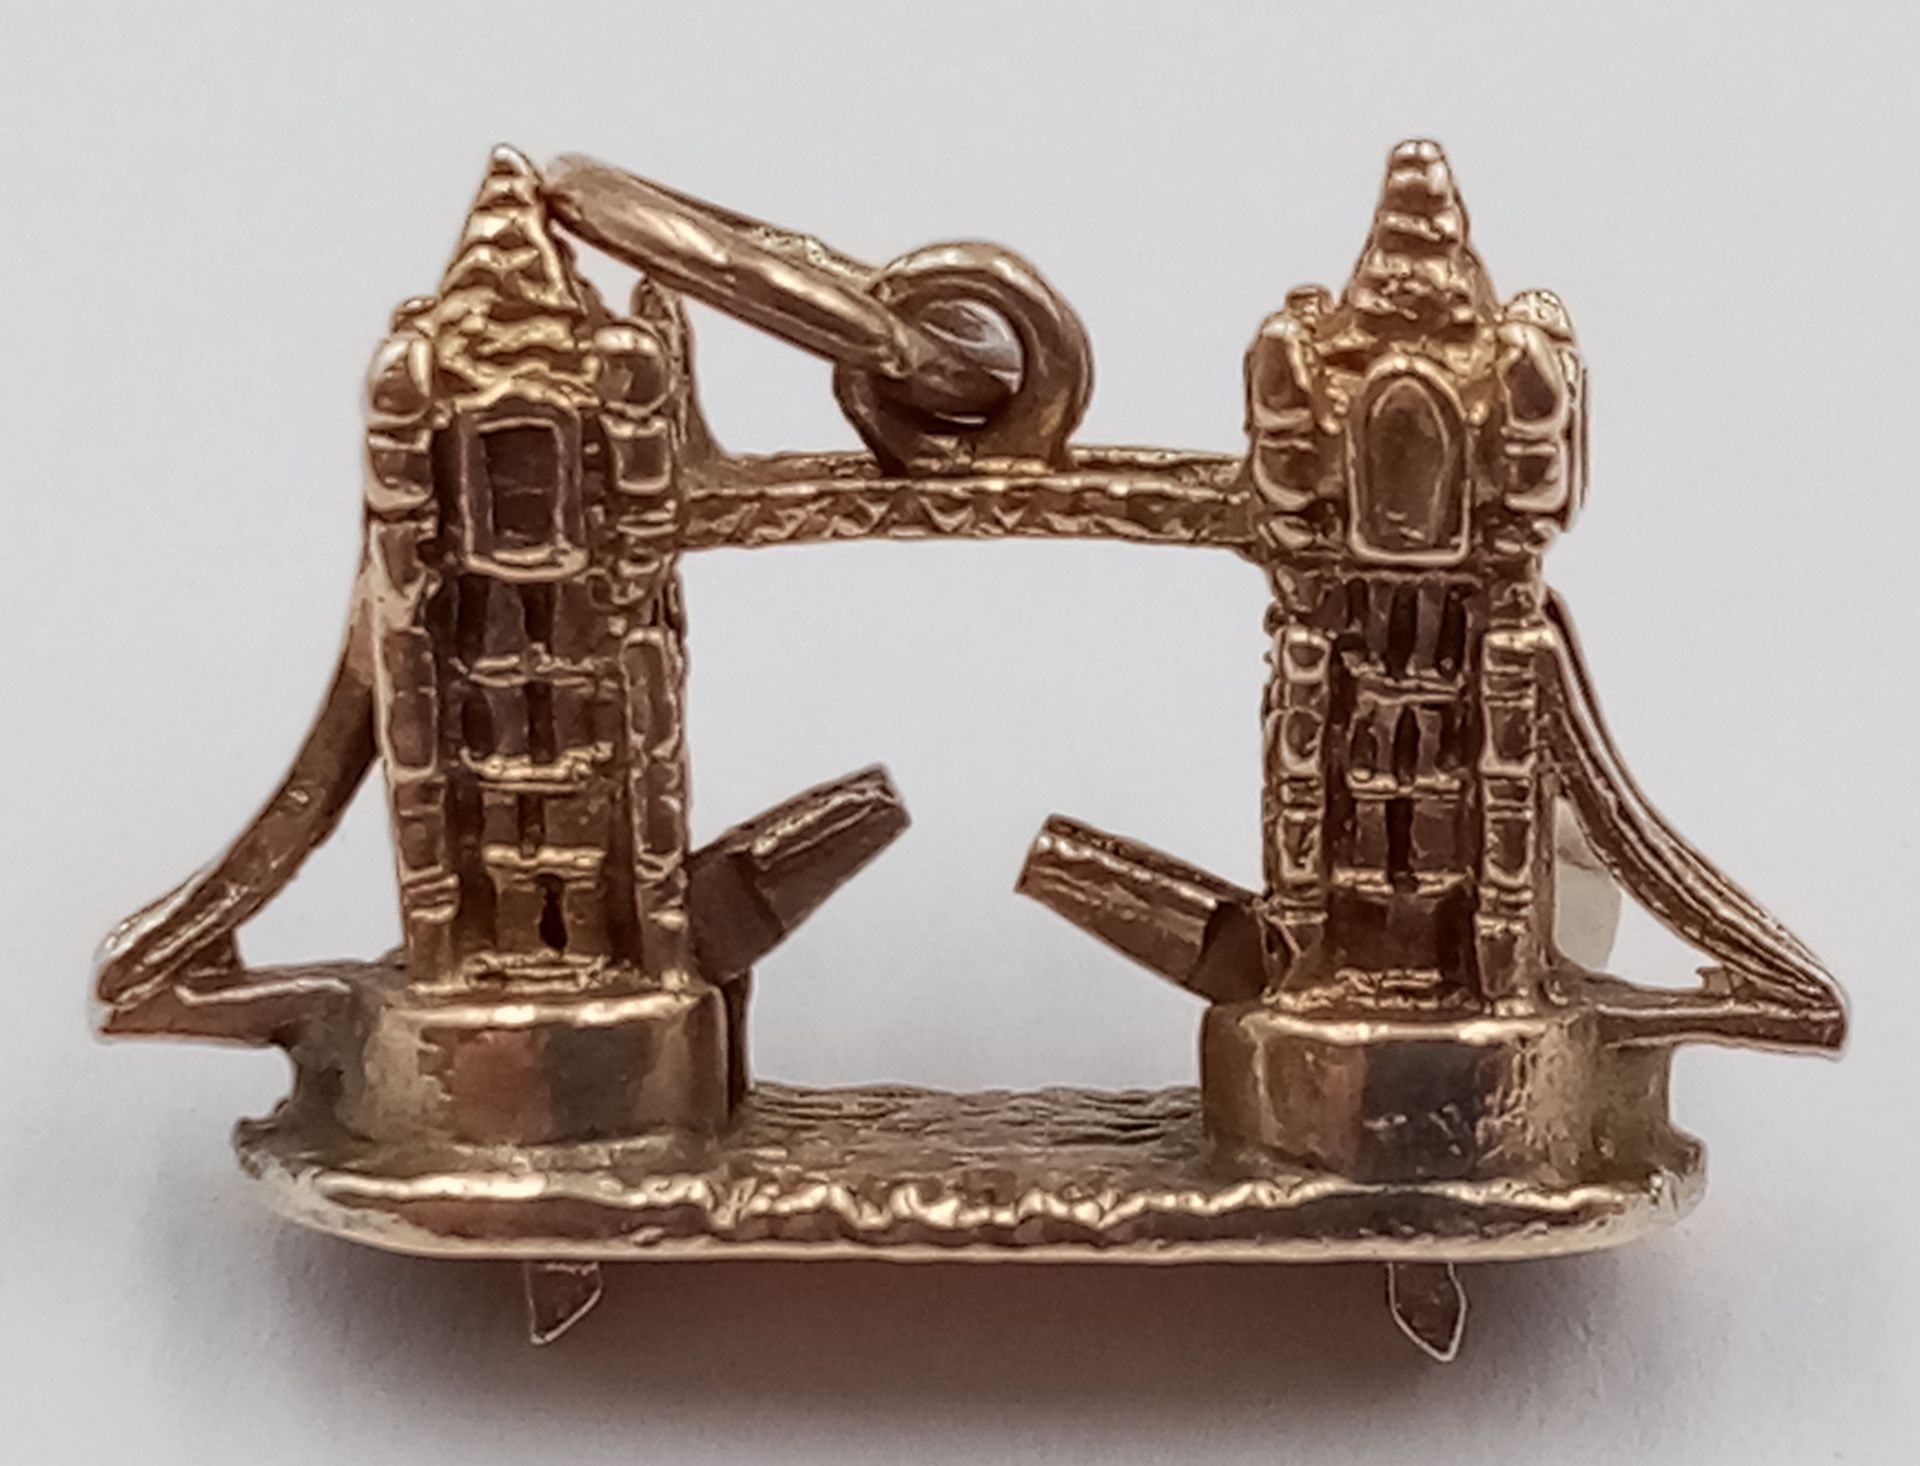 A 9K YELLOW GOLD LONDON TOWER BRIDGE CHARM, WITH MOVING PARTS WHERE THE BRIDGE LIFTS. 2cm x 1.5cm. - Image 2 of 3